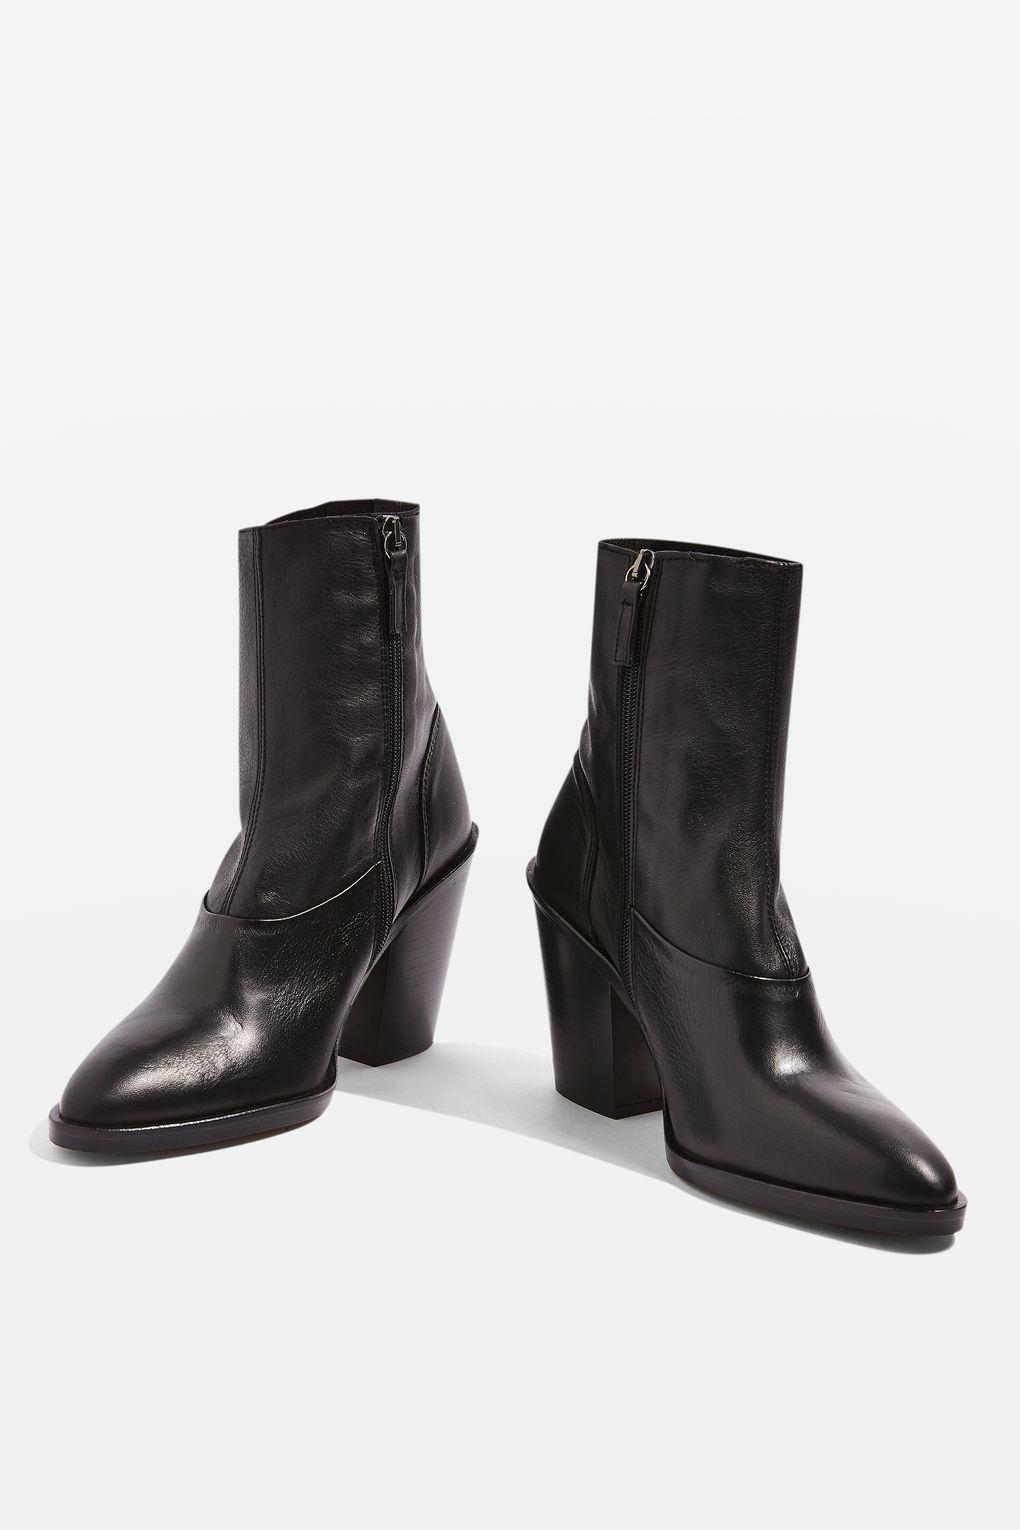 TOPSHOP Leather May Sock Boots in Black - Lyst